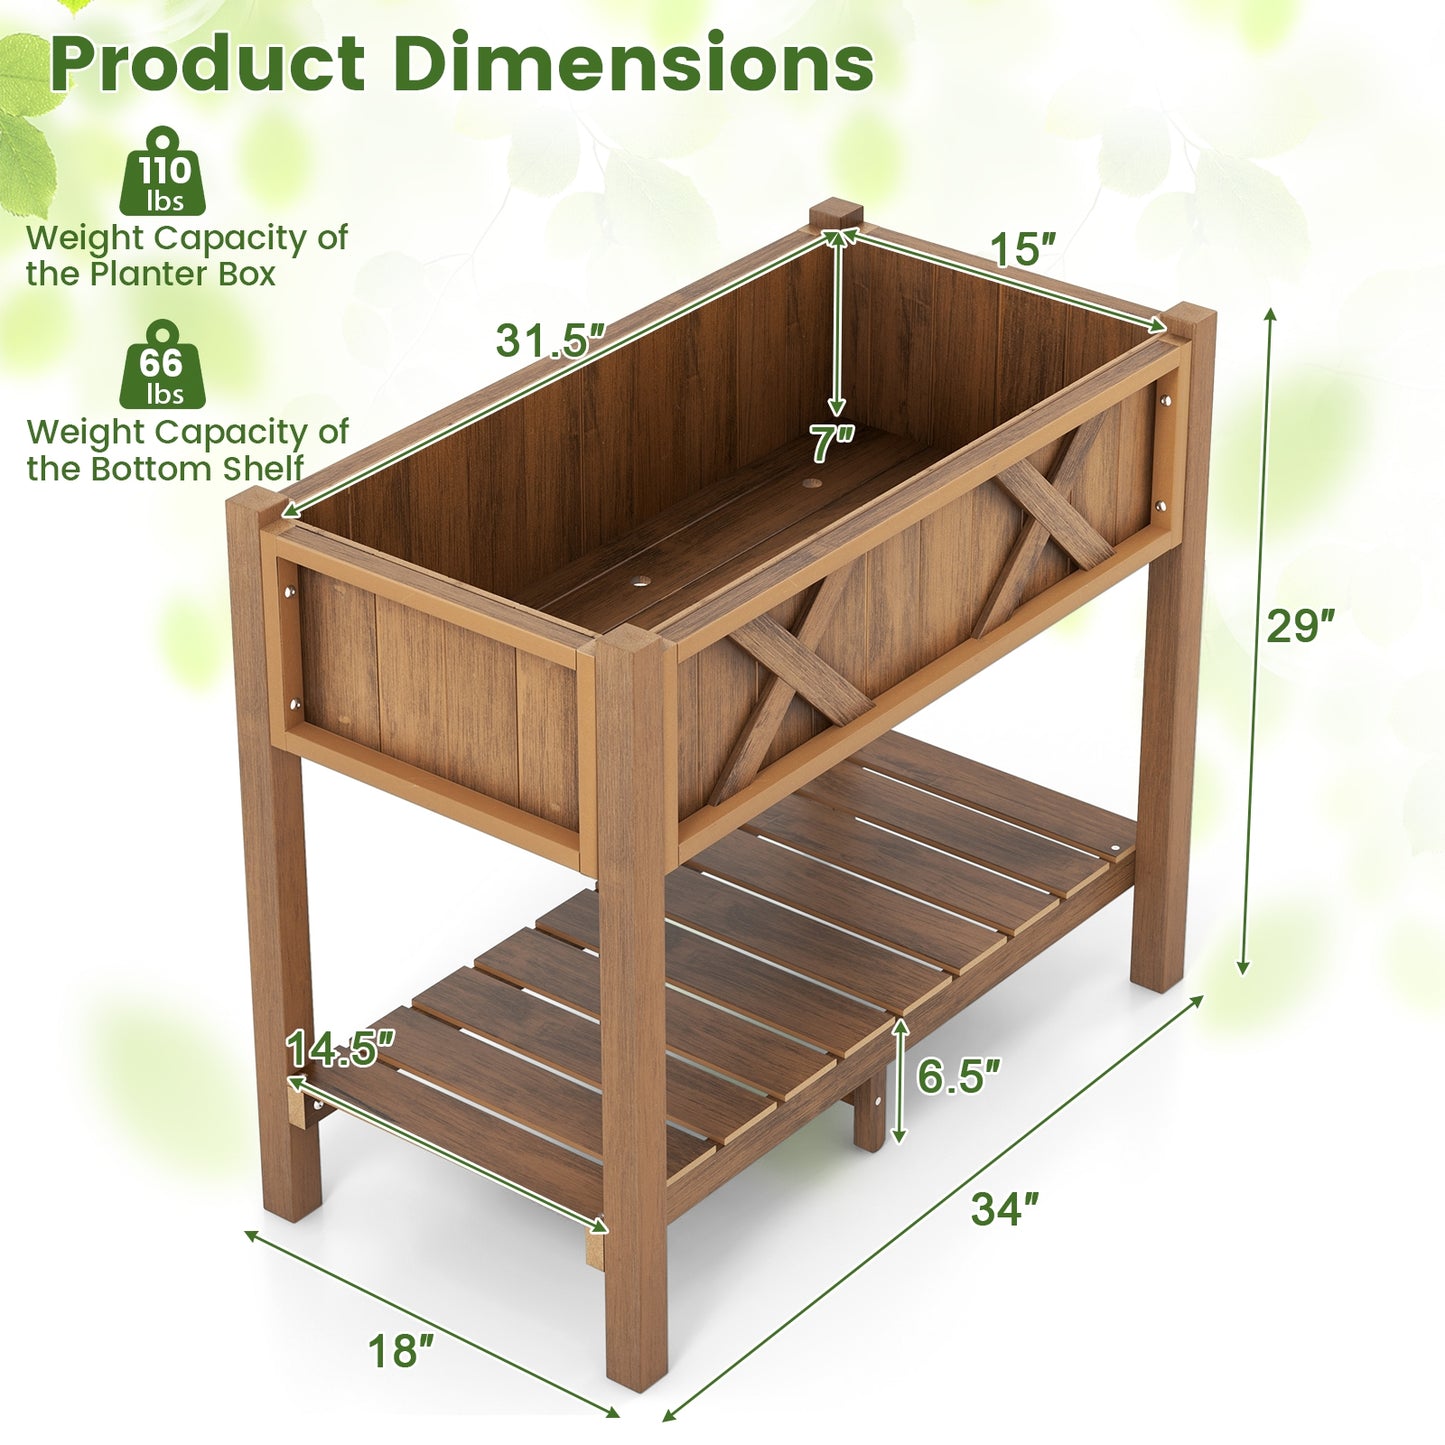 HIPS Raised Garden Bed Poly Wood Elevated Planter Box-Coffee